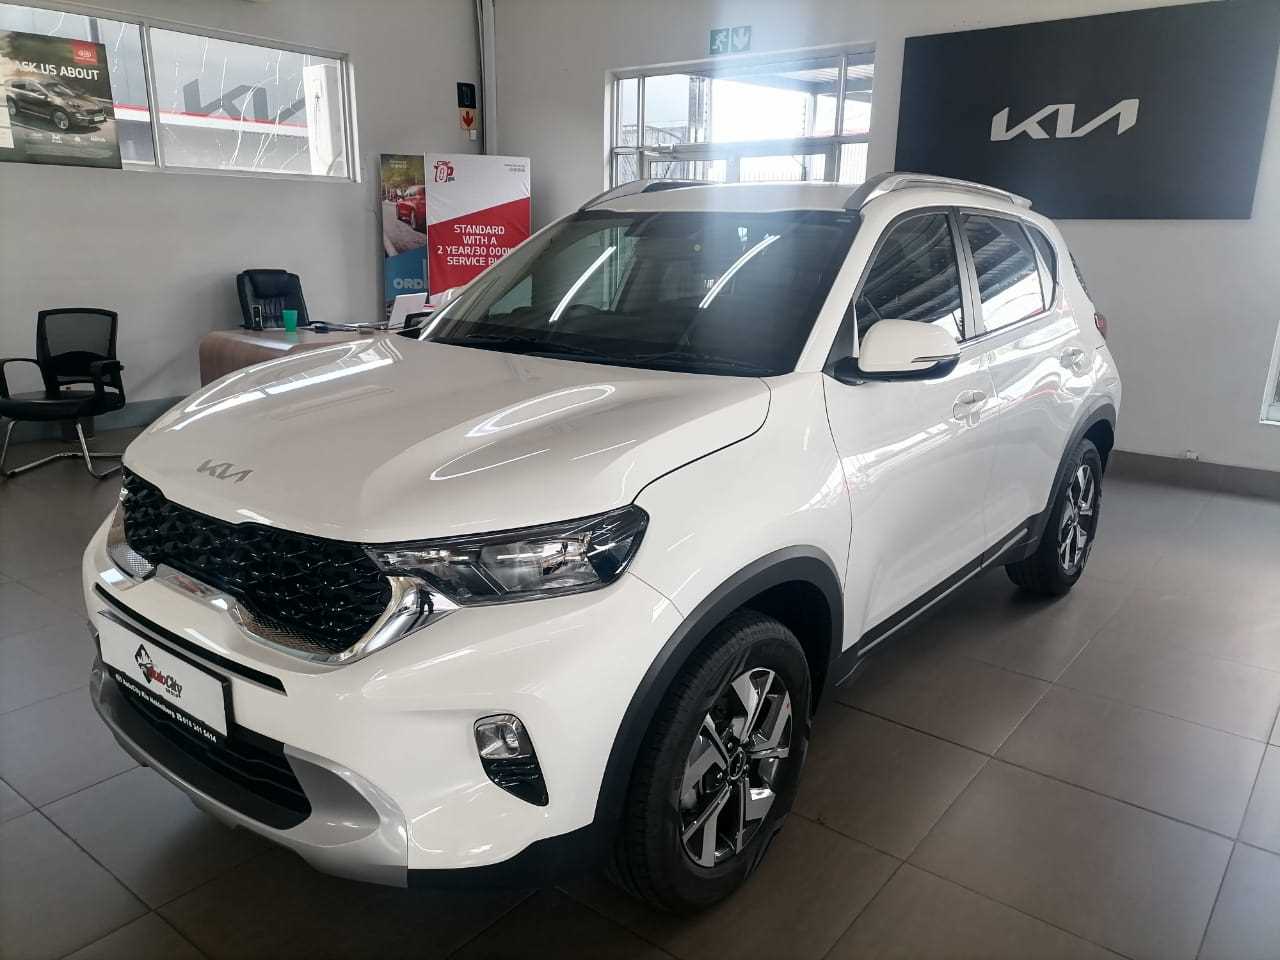 KIA 1.5 CVT EX for Sale in South Africa